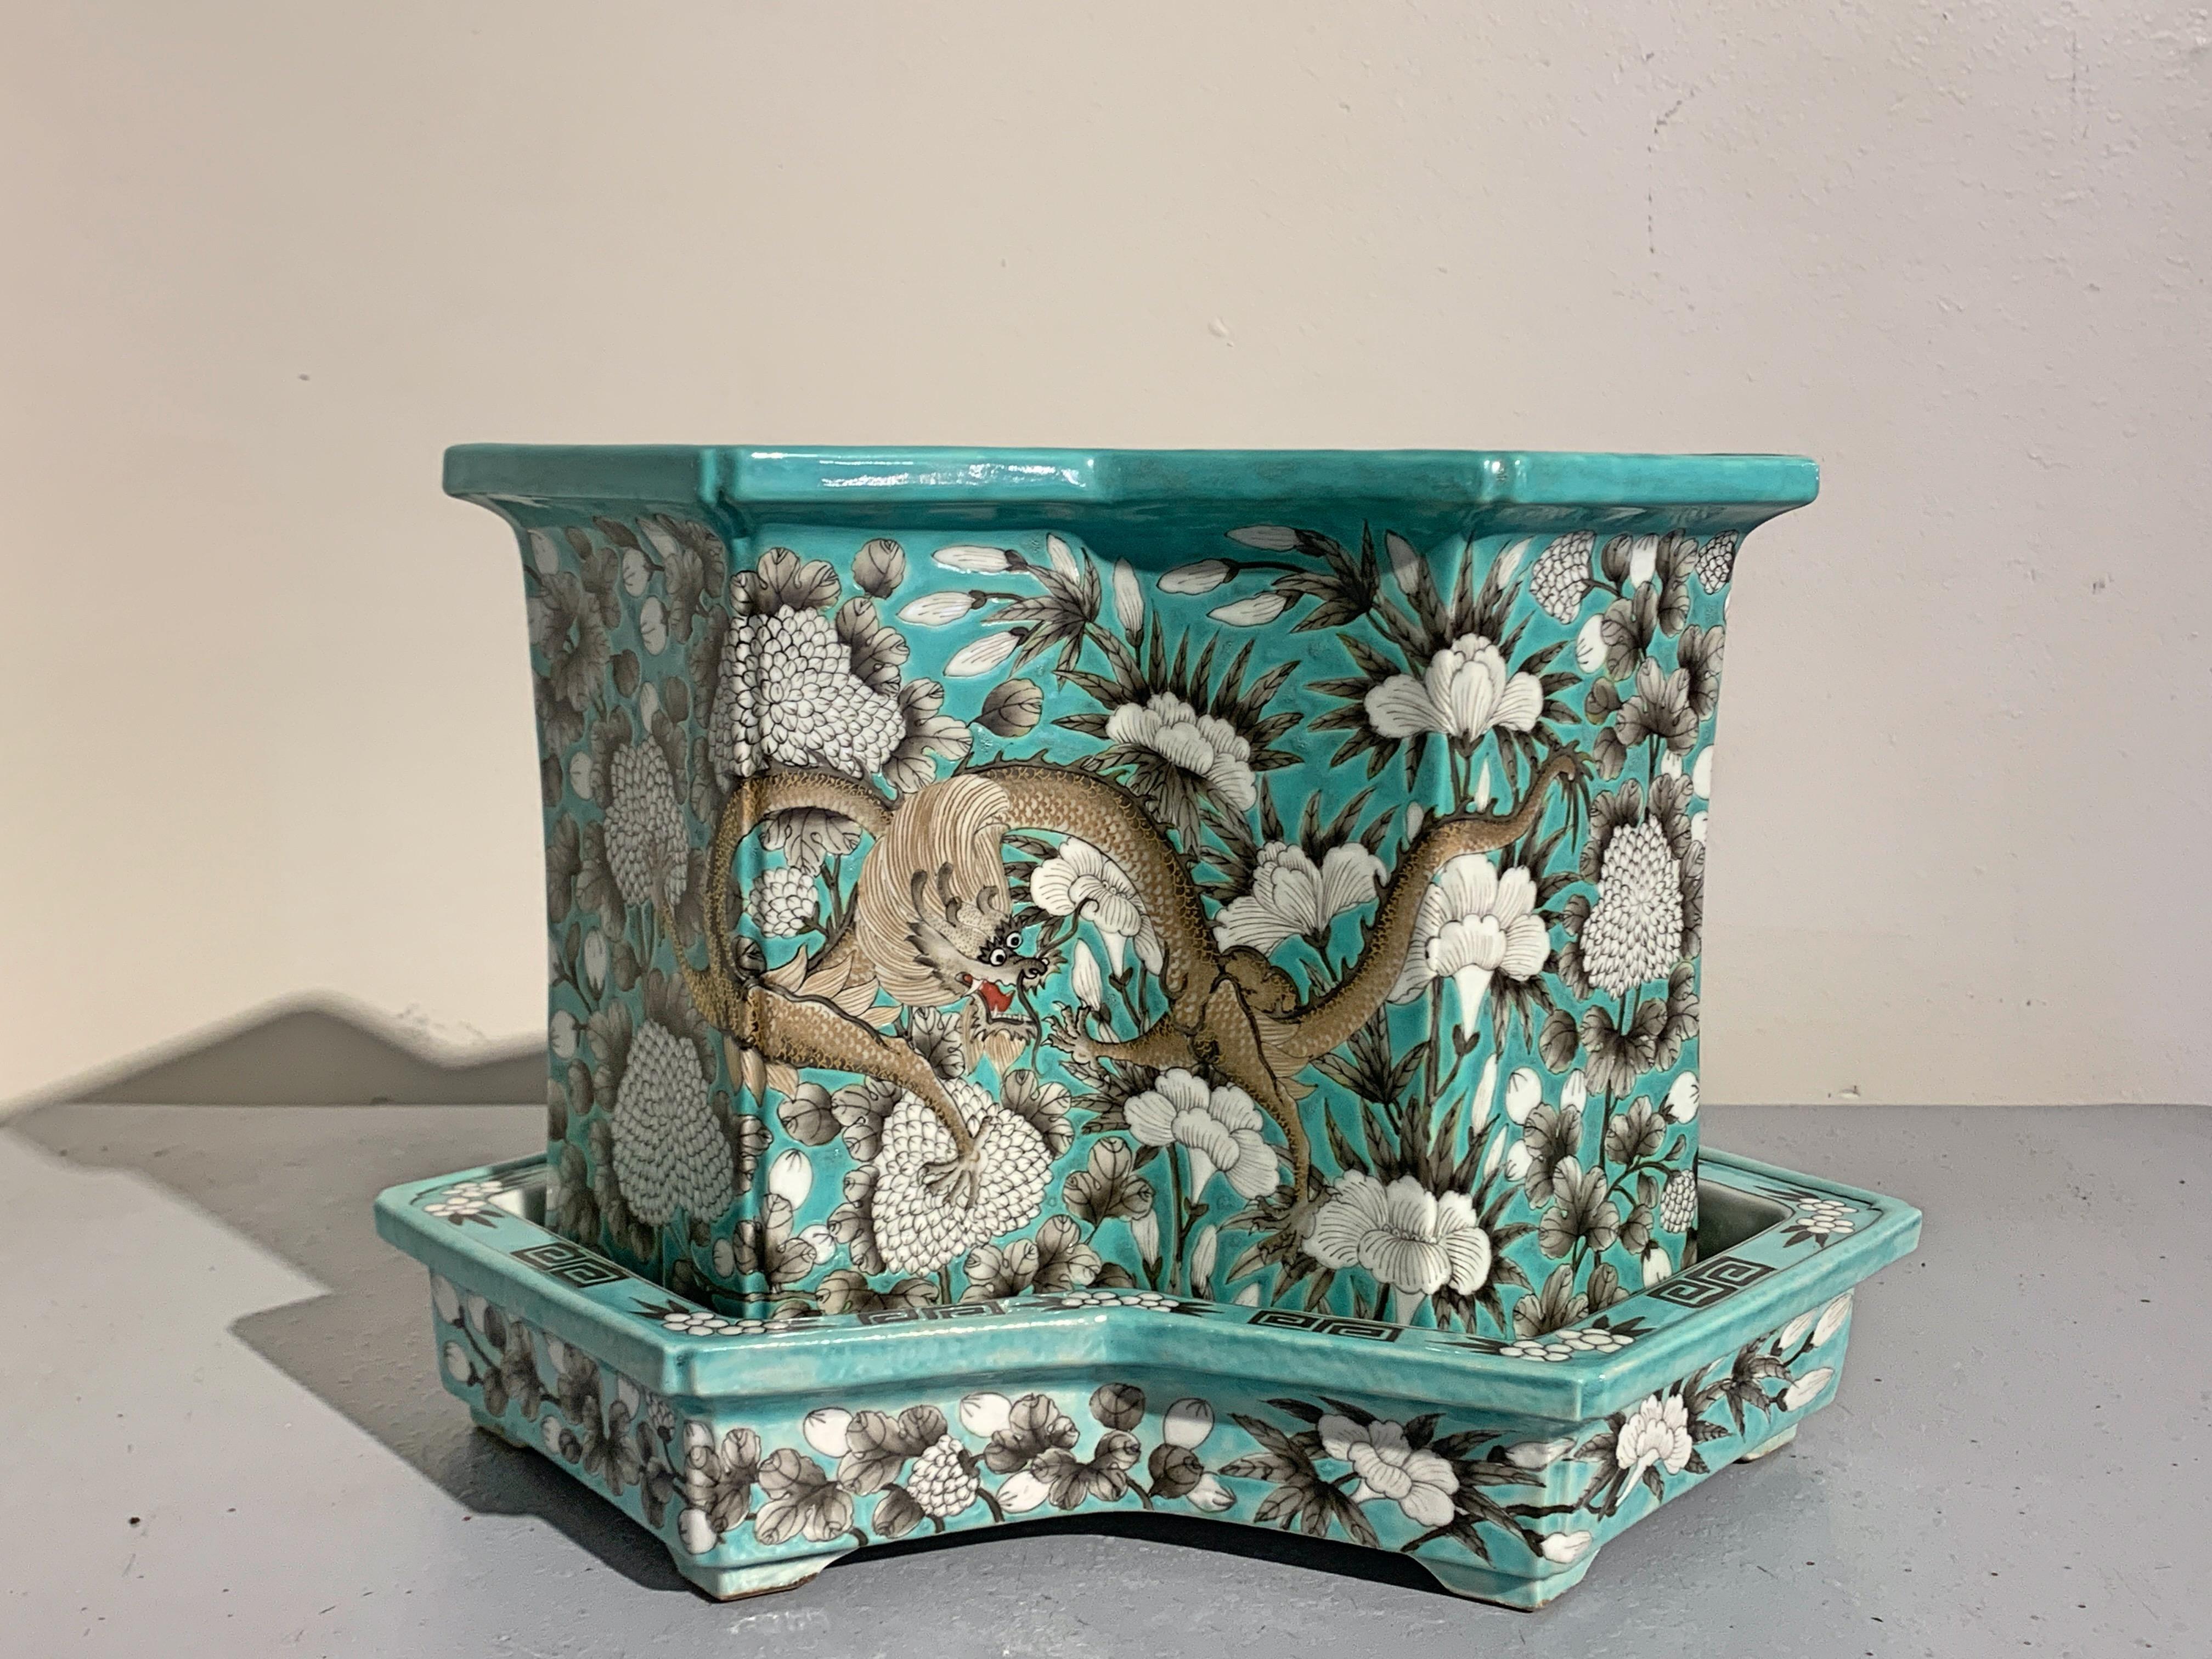 A finely painted Chinese Dayazhai style turquoise glazed double lozenge shaped porcelain jardiniere and underplate with grisaille and gilt decoration, mid-20th century, China. 

The tall porcelain jardiniere of double lozenge (fangsheng) form, an